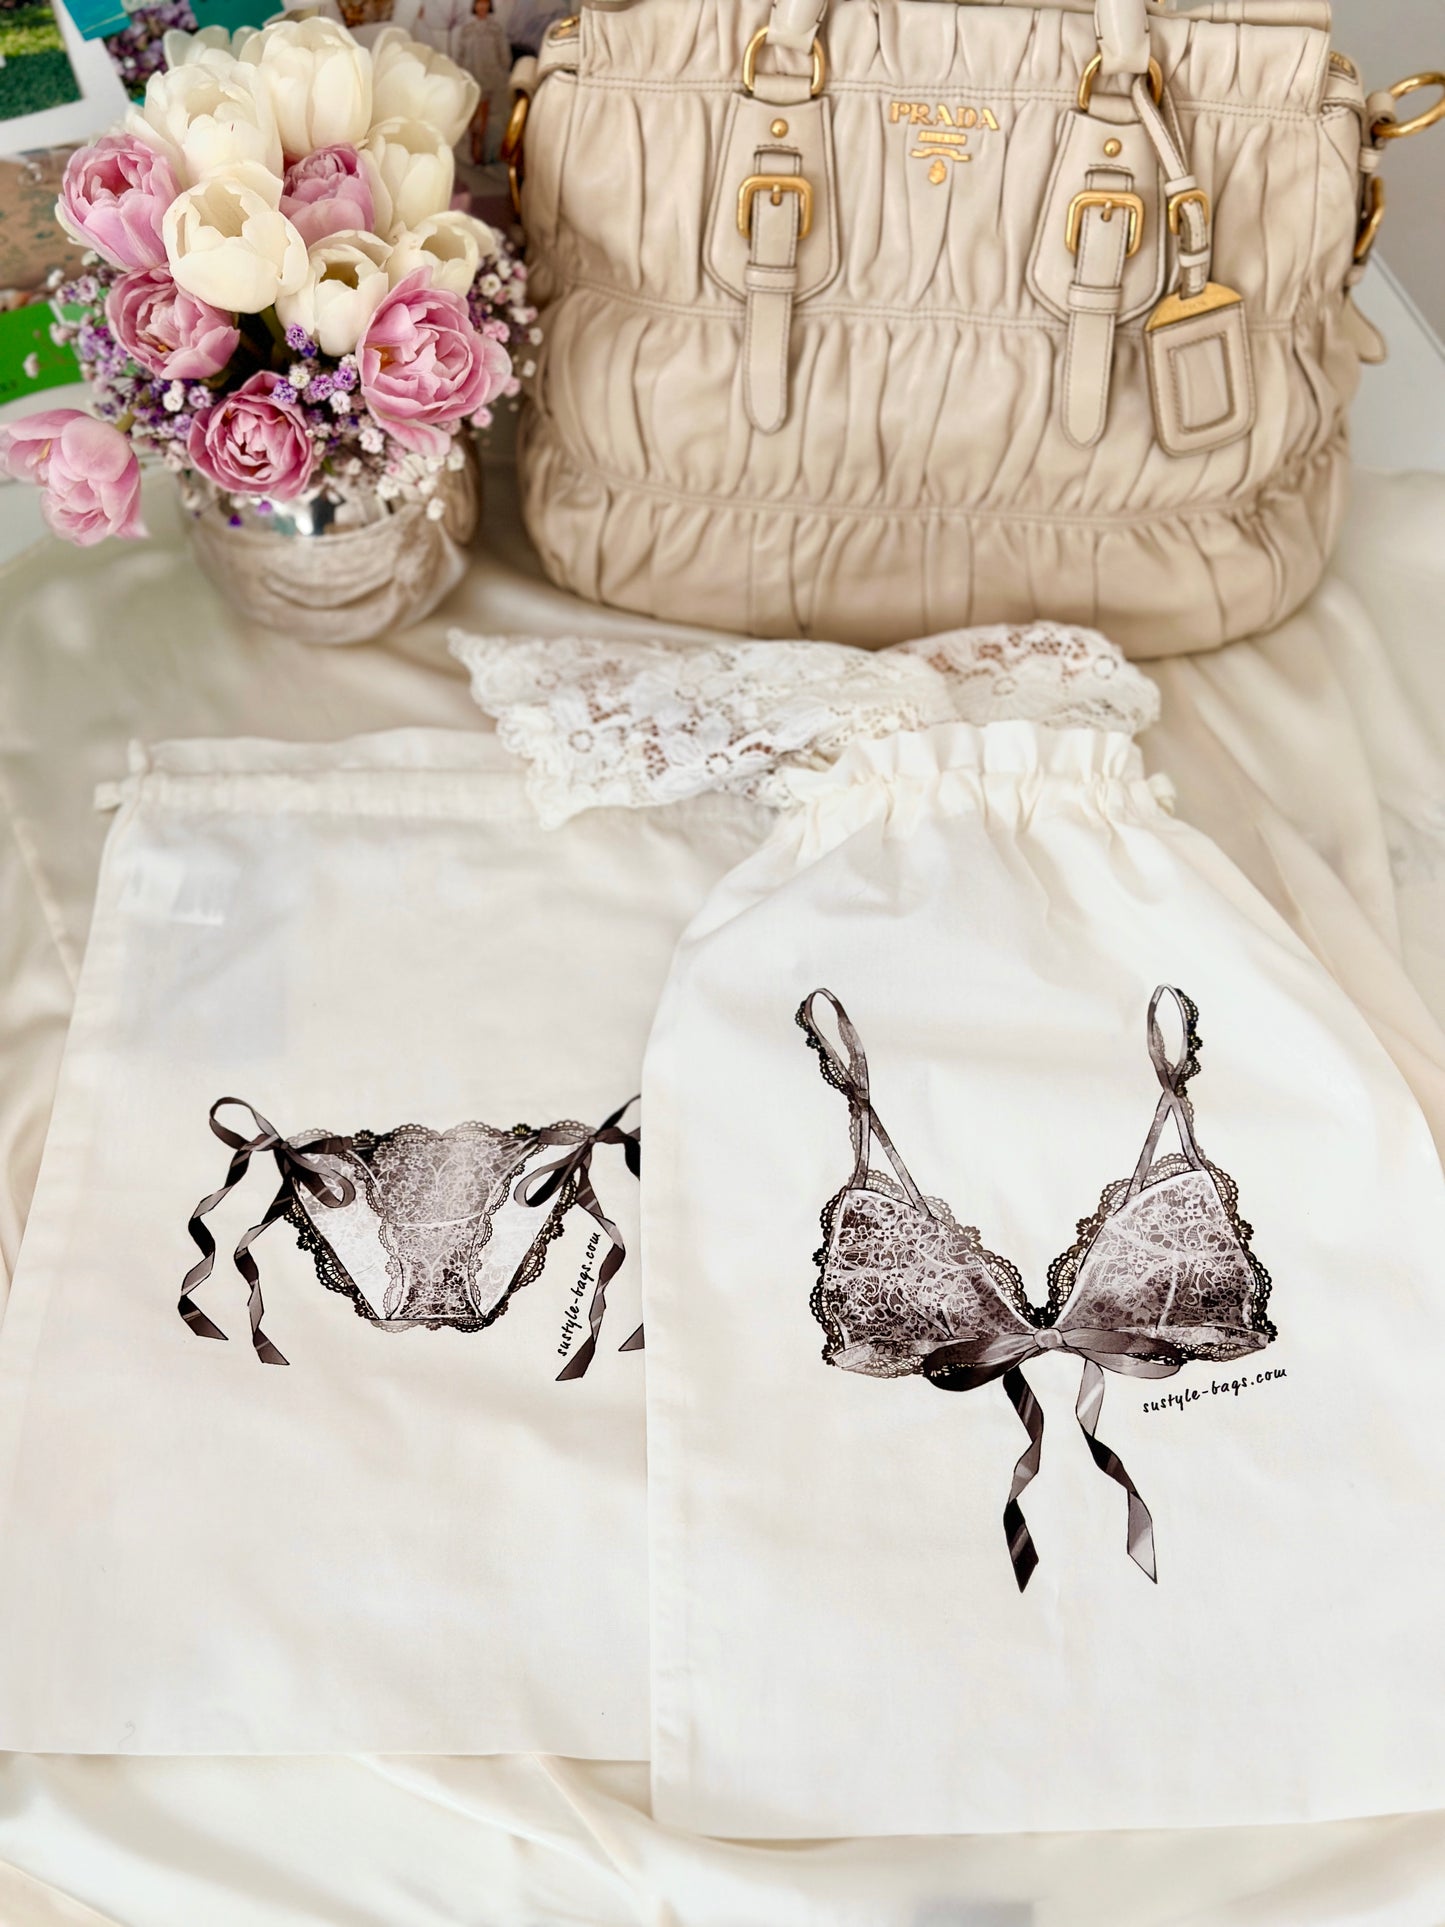 Lingerie bag with panty